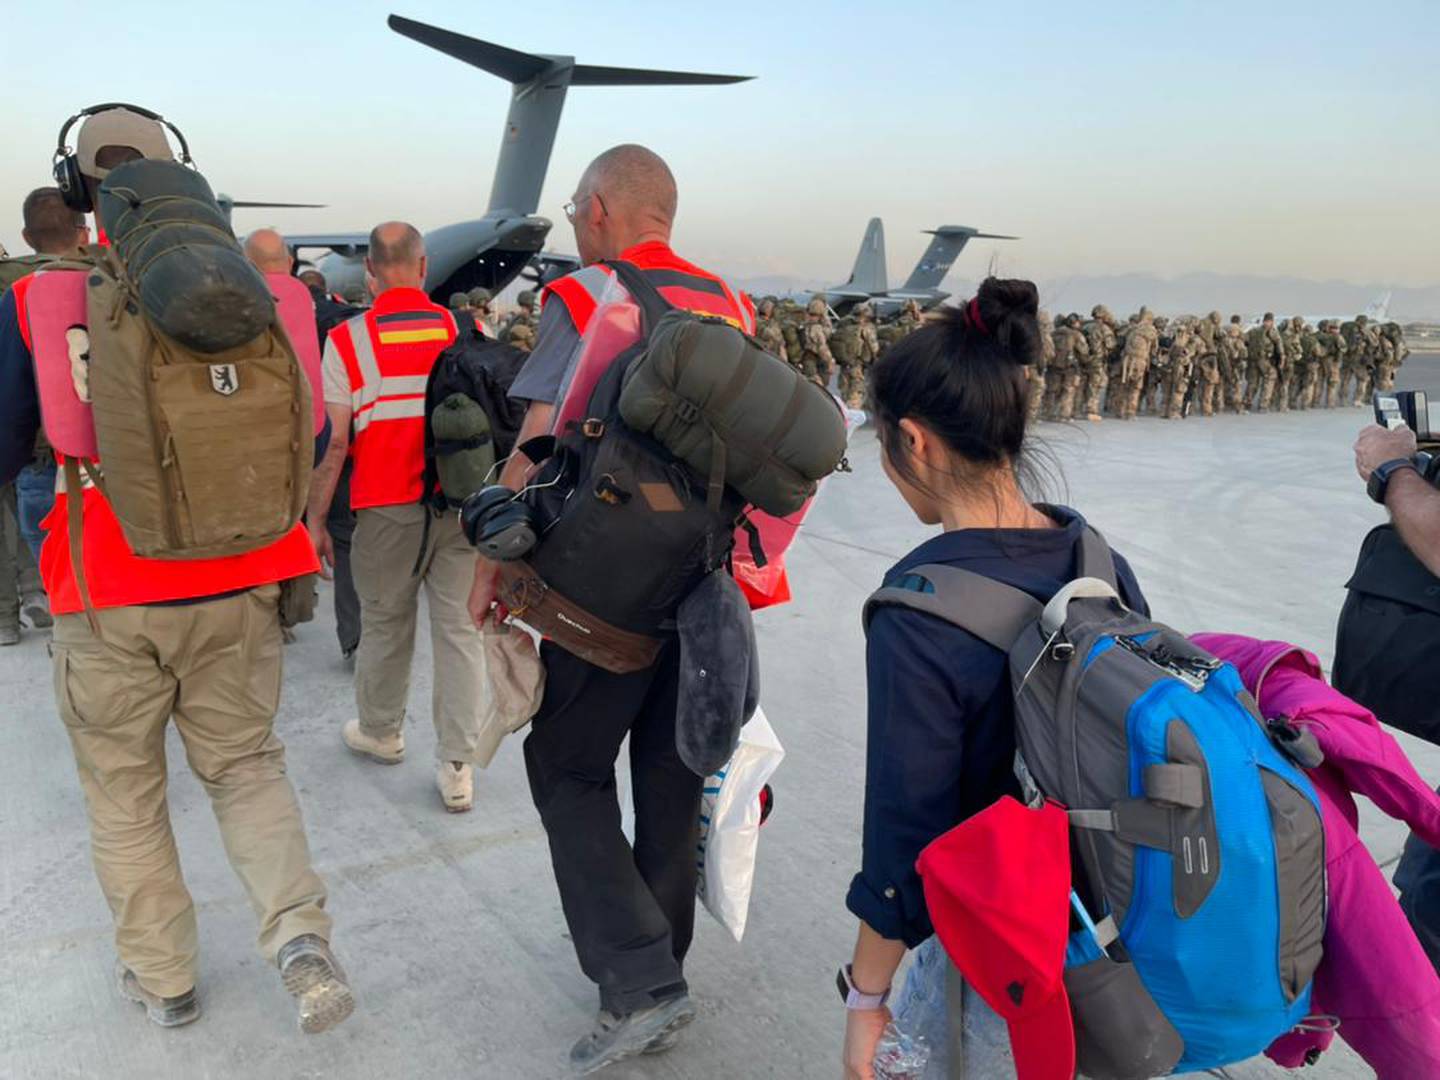 Mr Lavery and his team helped people leave Afghanistan.